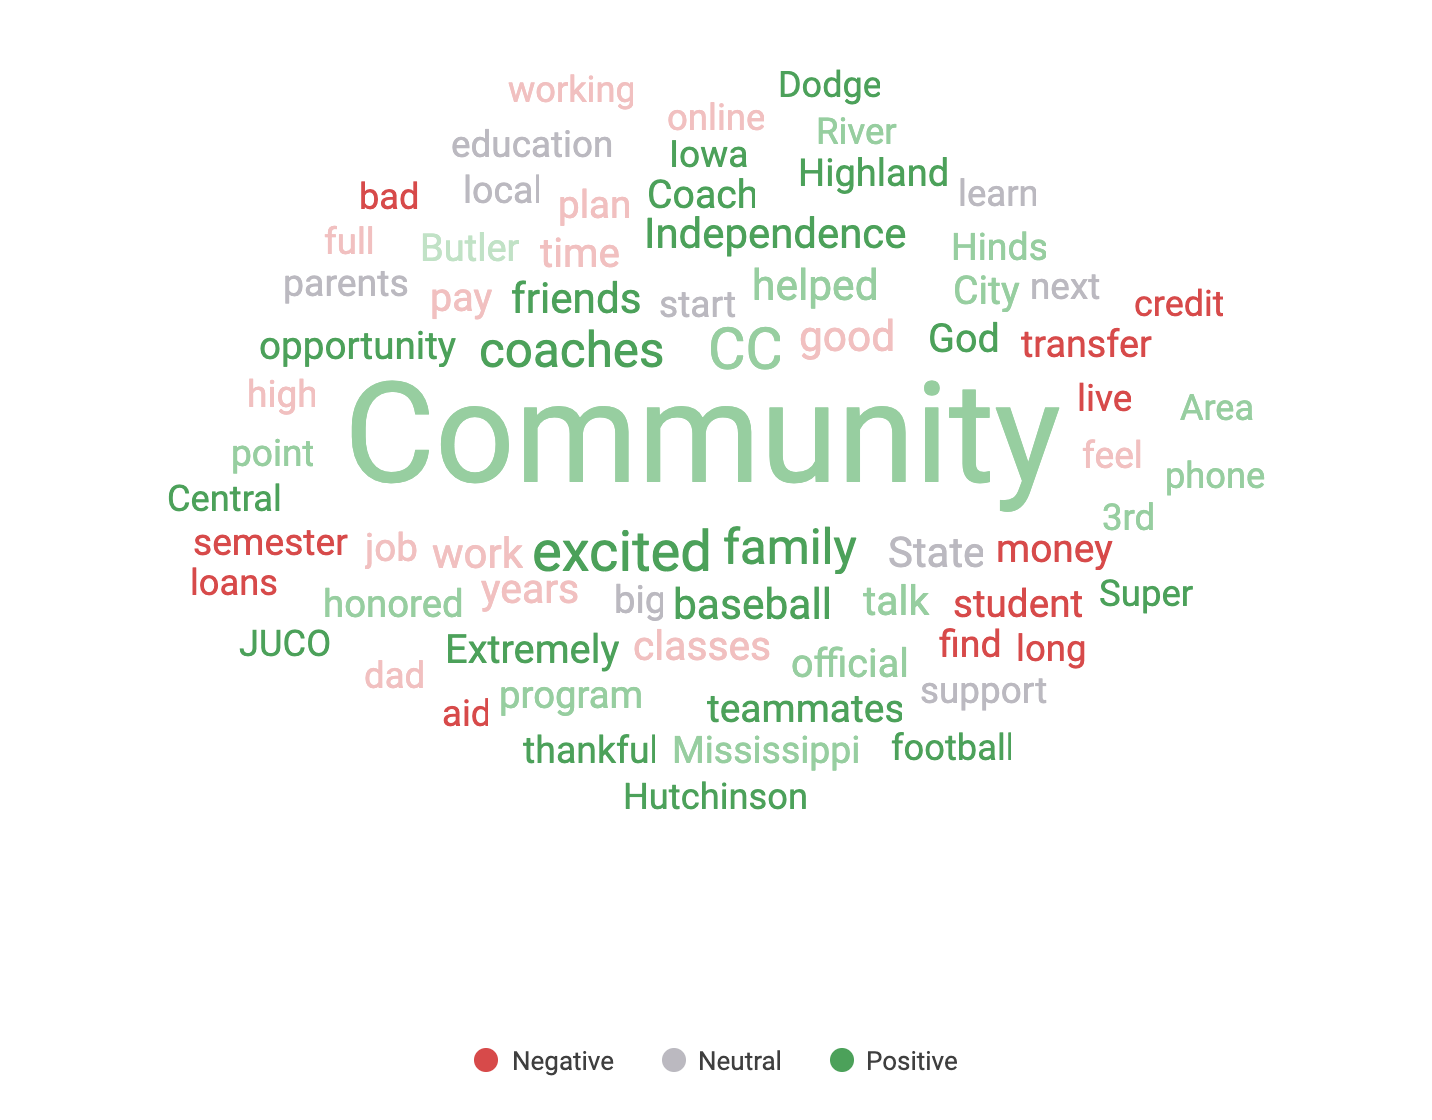 2-year prospective and admitted student conversation word cloud with top keywords by sentiment, red are negative, grey are neutral, and green are positive